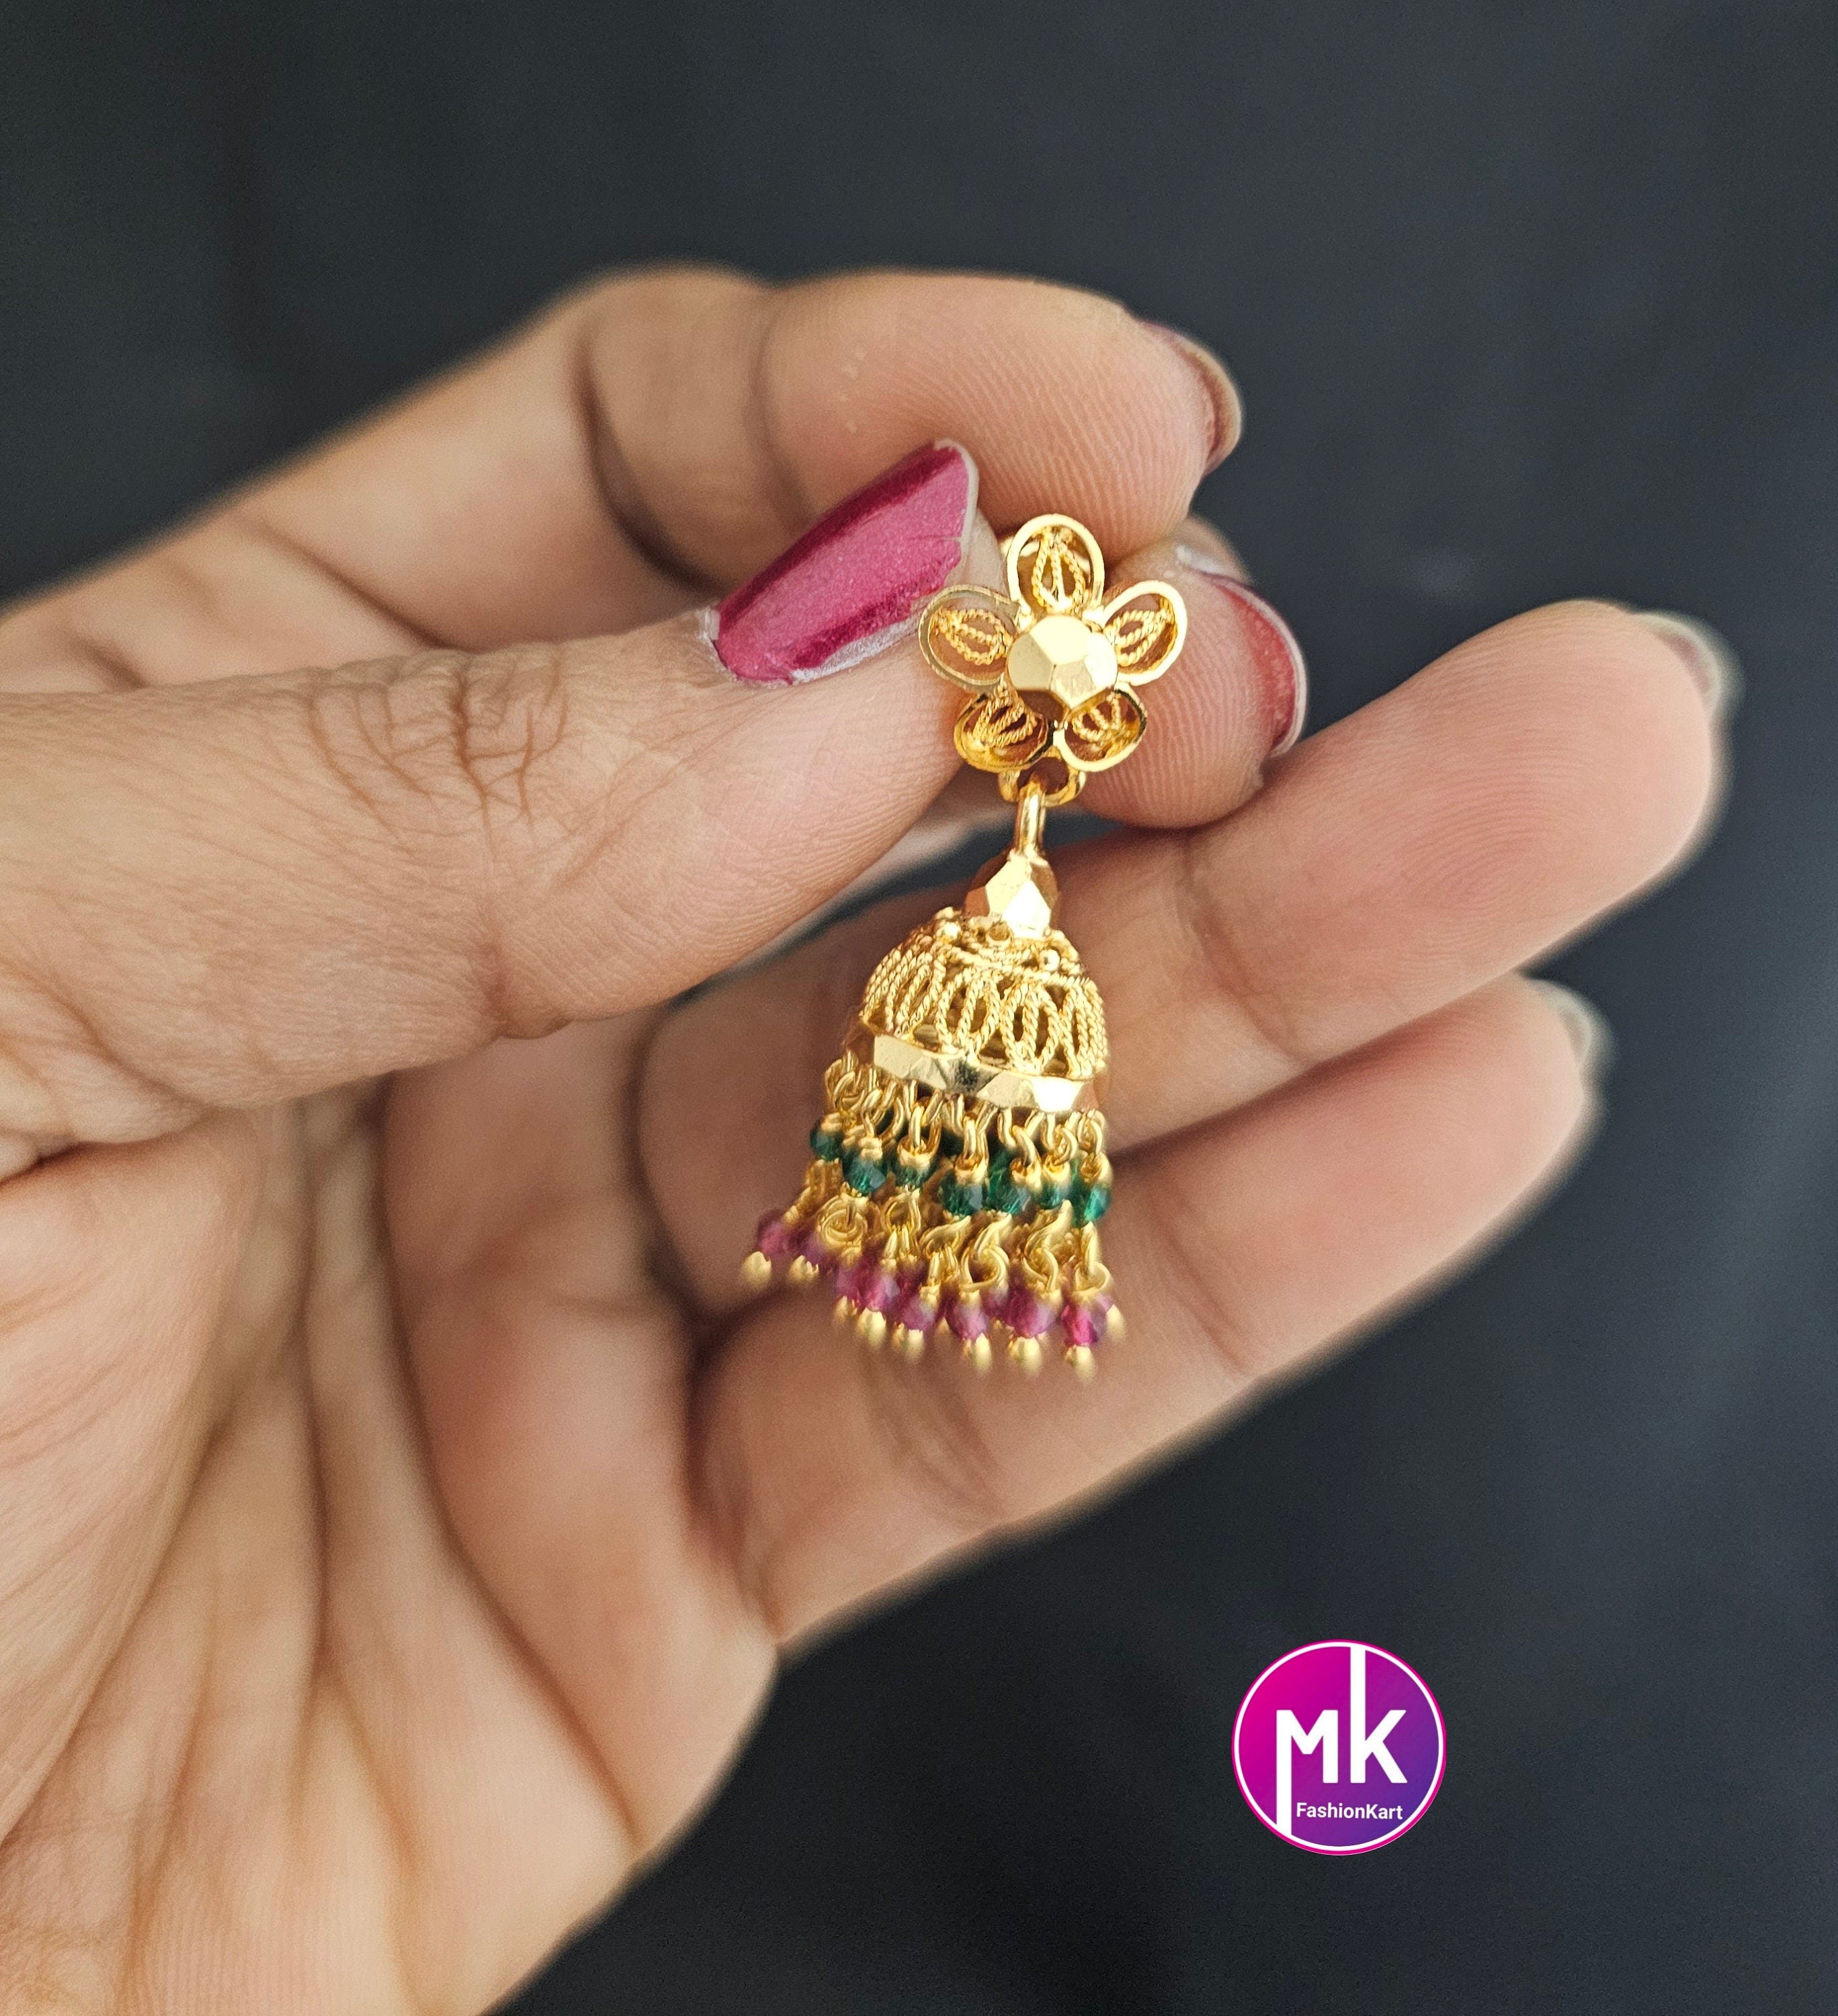 Gold finish Flower design Jhumka with hanging crystals and gold beads